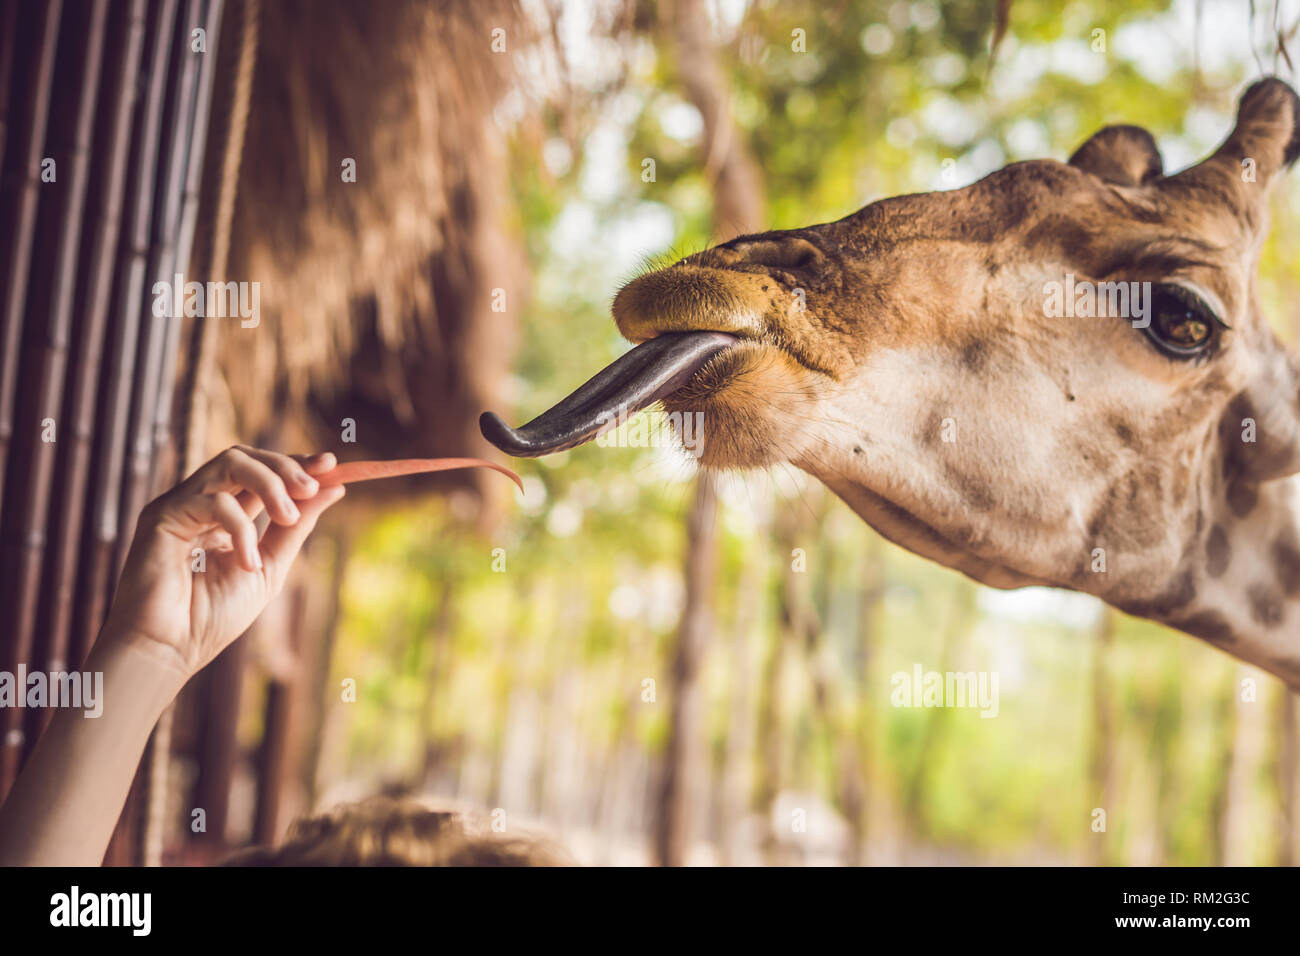 Happy young woman watching and feeding giraffe in zoo. Happy young woman having fun with animals safari park on warm summer day Stock Photo